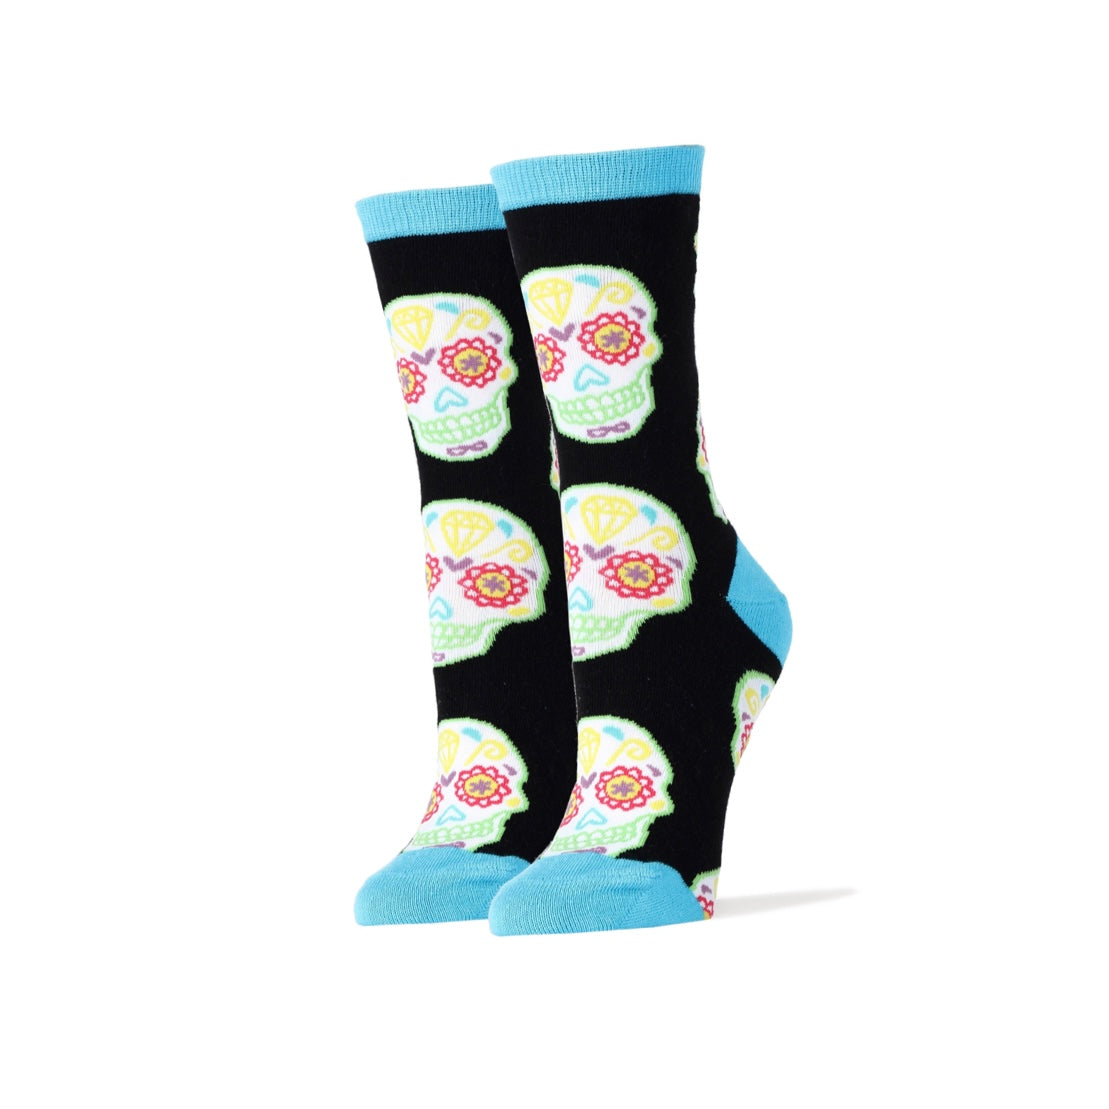 Women's black socks featuring white and multi-colored sugar skulls with blue ankle, heel and toe accents.